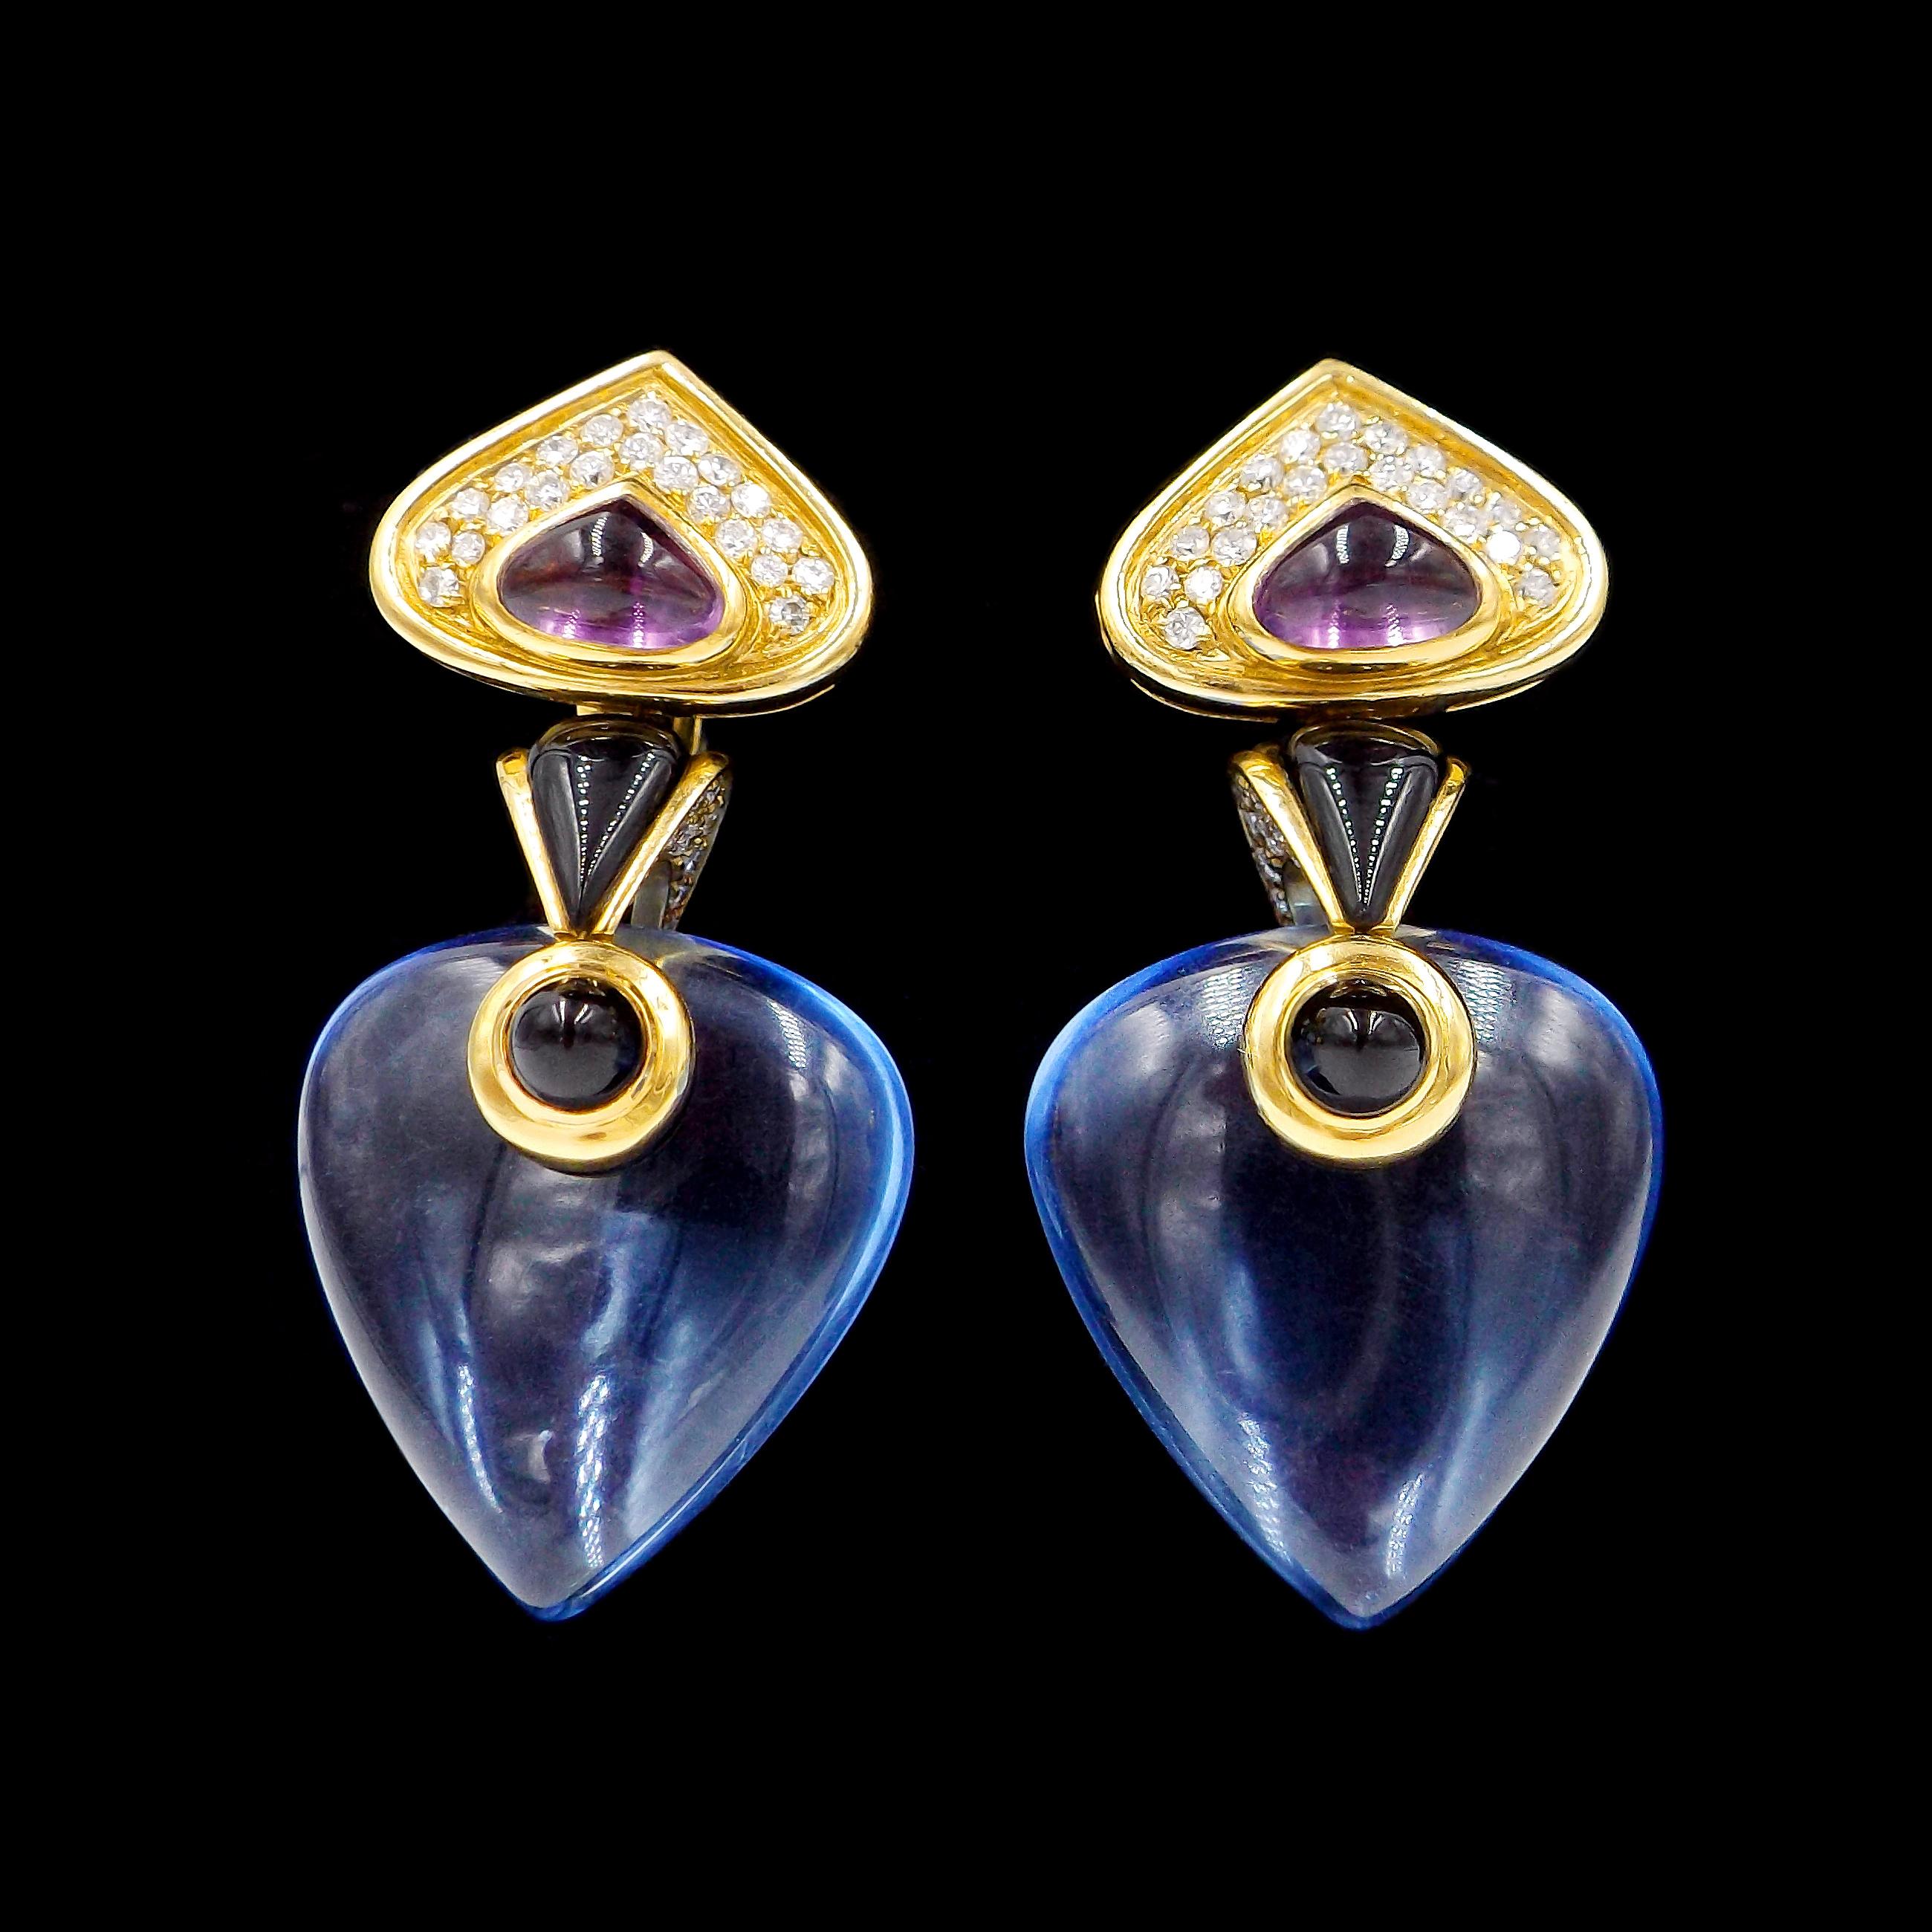 Designed as diamond and amethyst earrings suspending a detachable diamond and onyx drop with interchangeable quartz beads
Metal: 18k yellow gold
Diamonds: 92 rounds diamonds with total weight of 1 carat
Stones: 2 cabochon amethysts, 6 carved